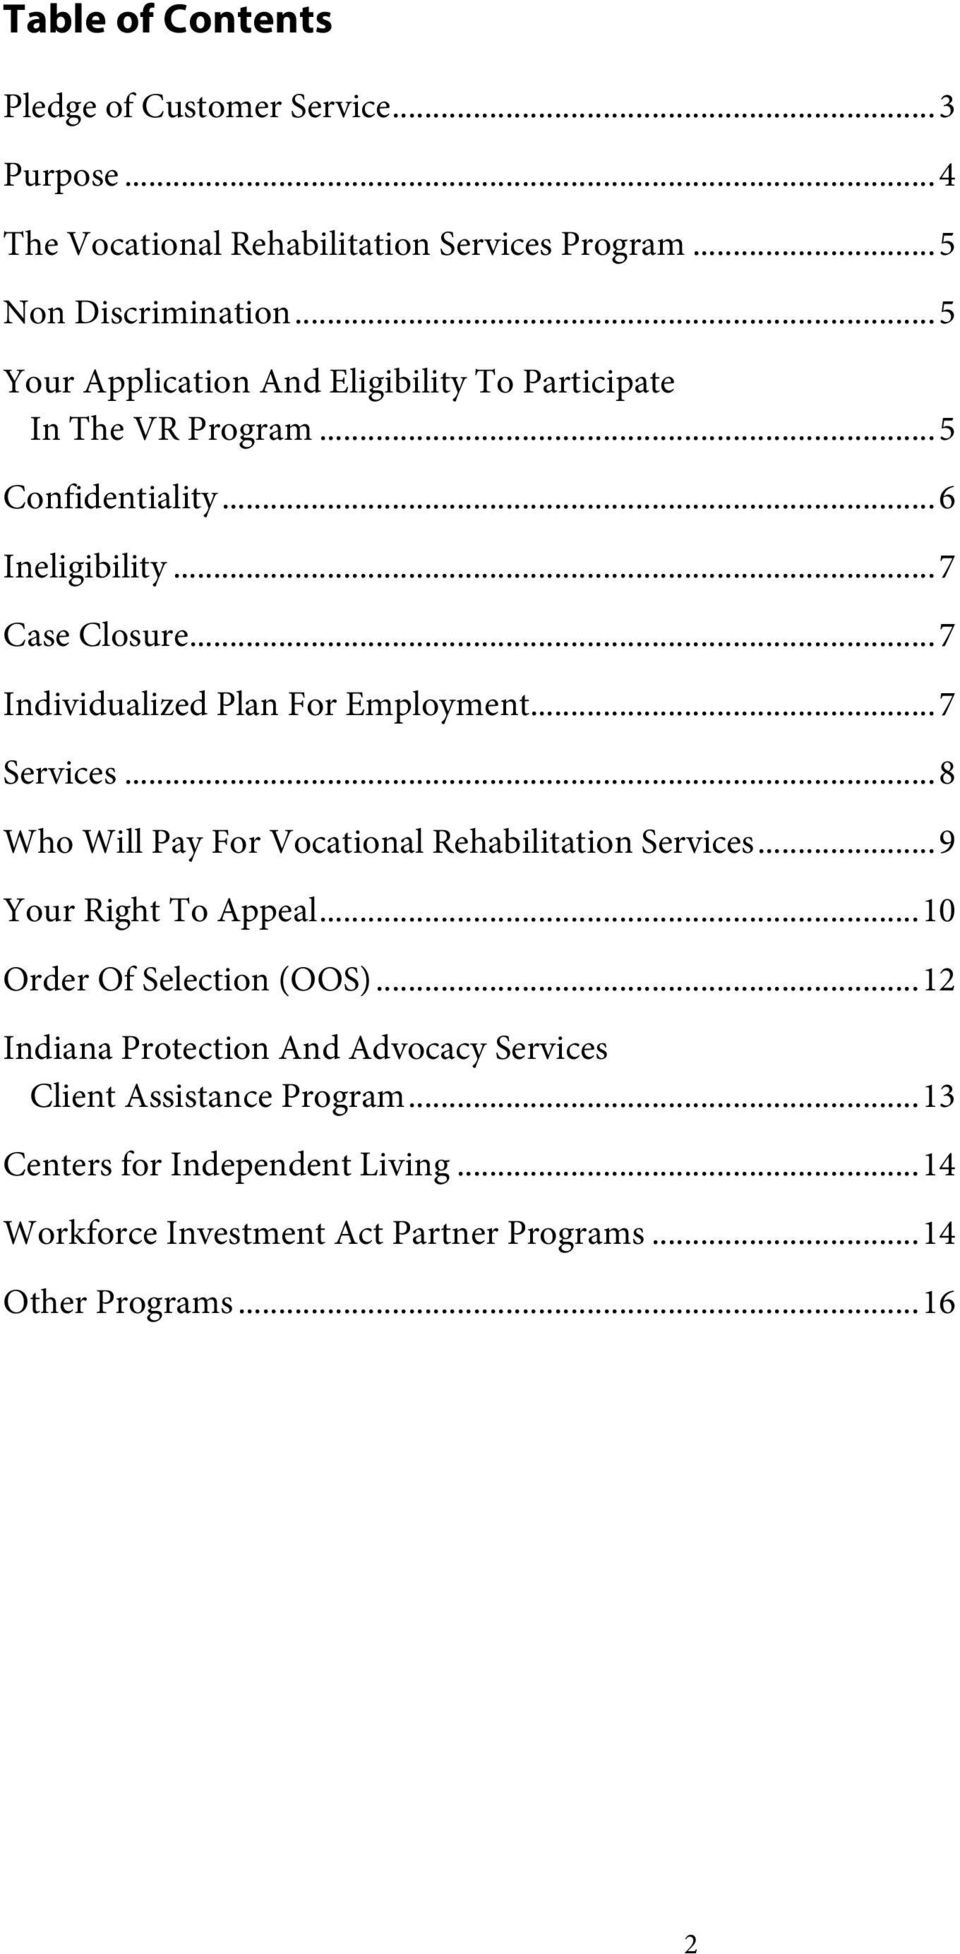 .. 7 Individualized Plan For Employment... 7 Services... 8 Who Will Pay For Vocational Rehabilitation Services... 9 Your Right To Appeal.